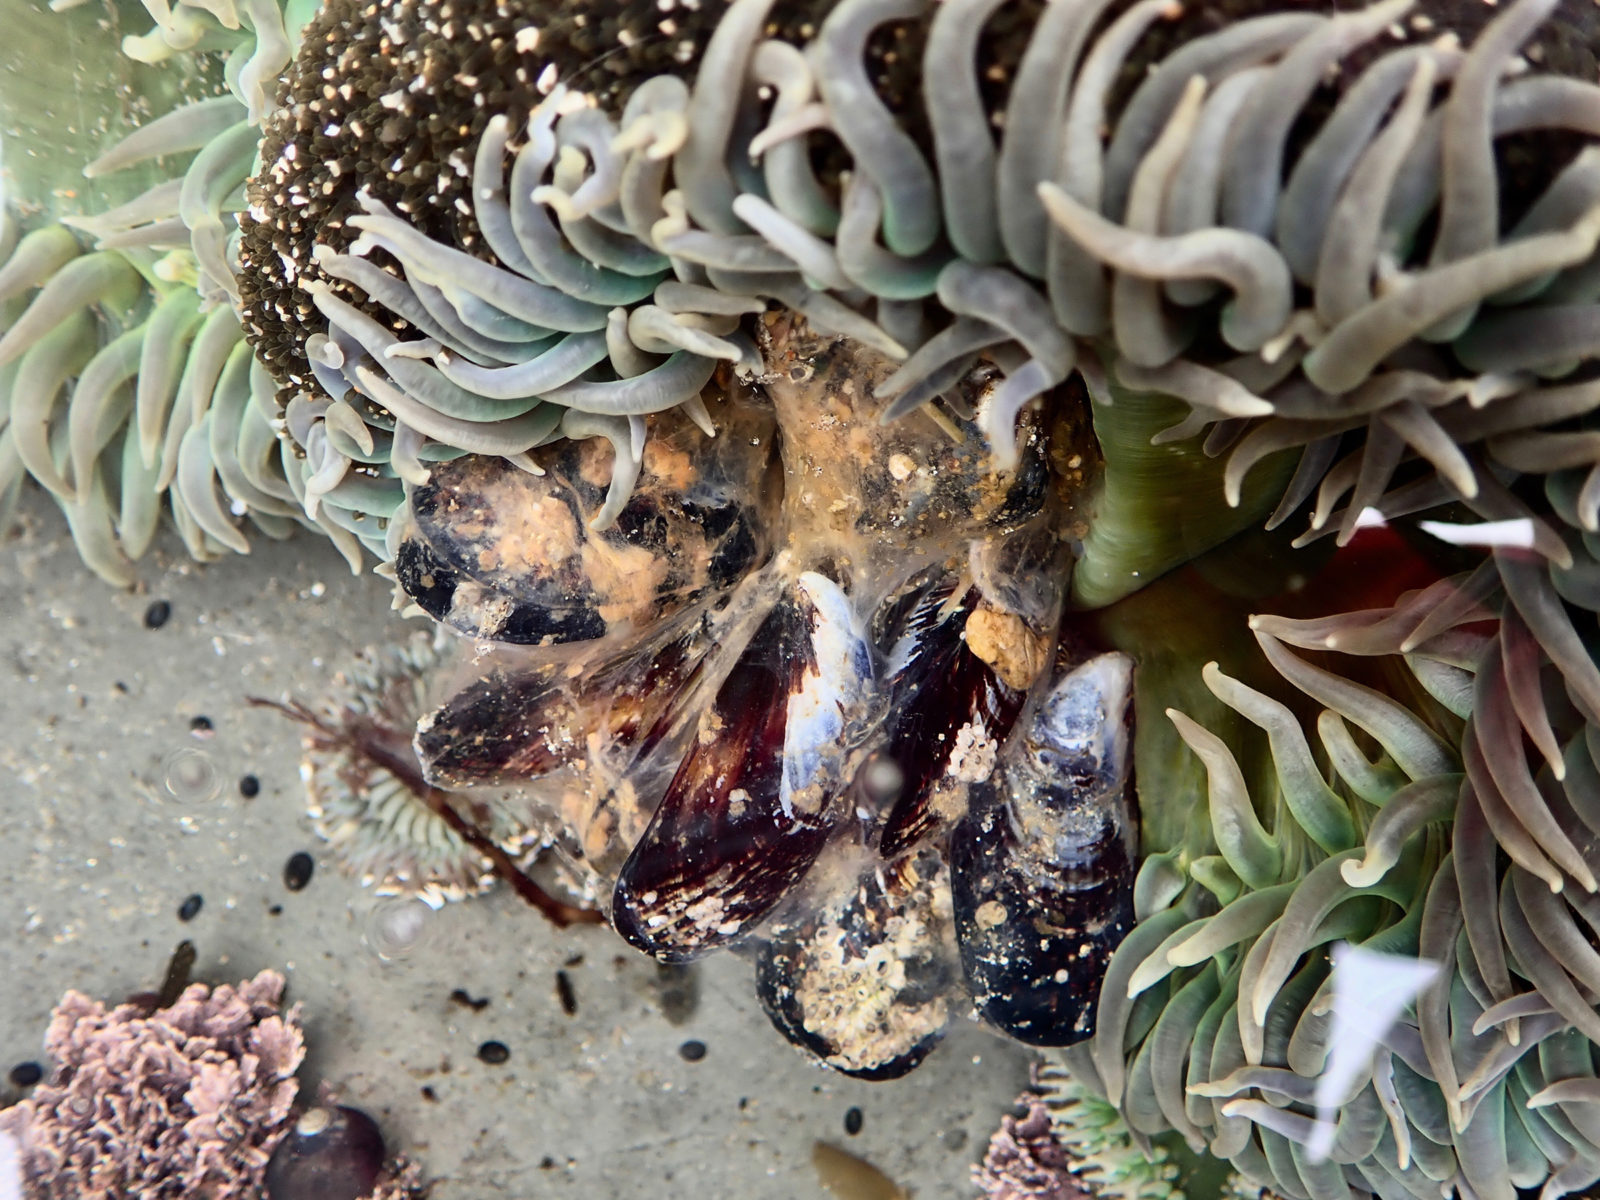 giant green anemone eats mussels